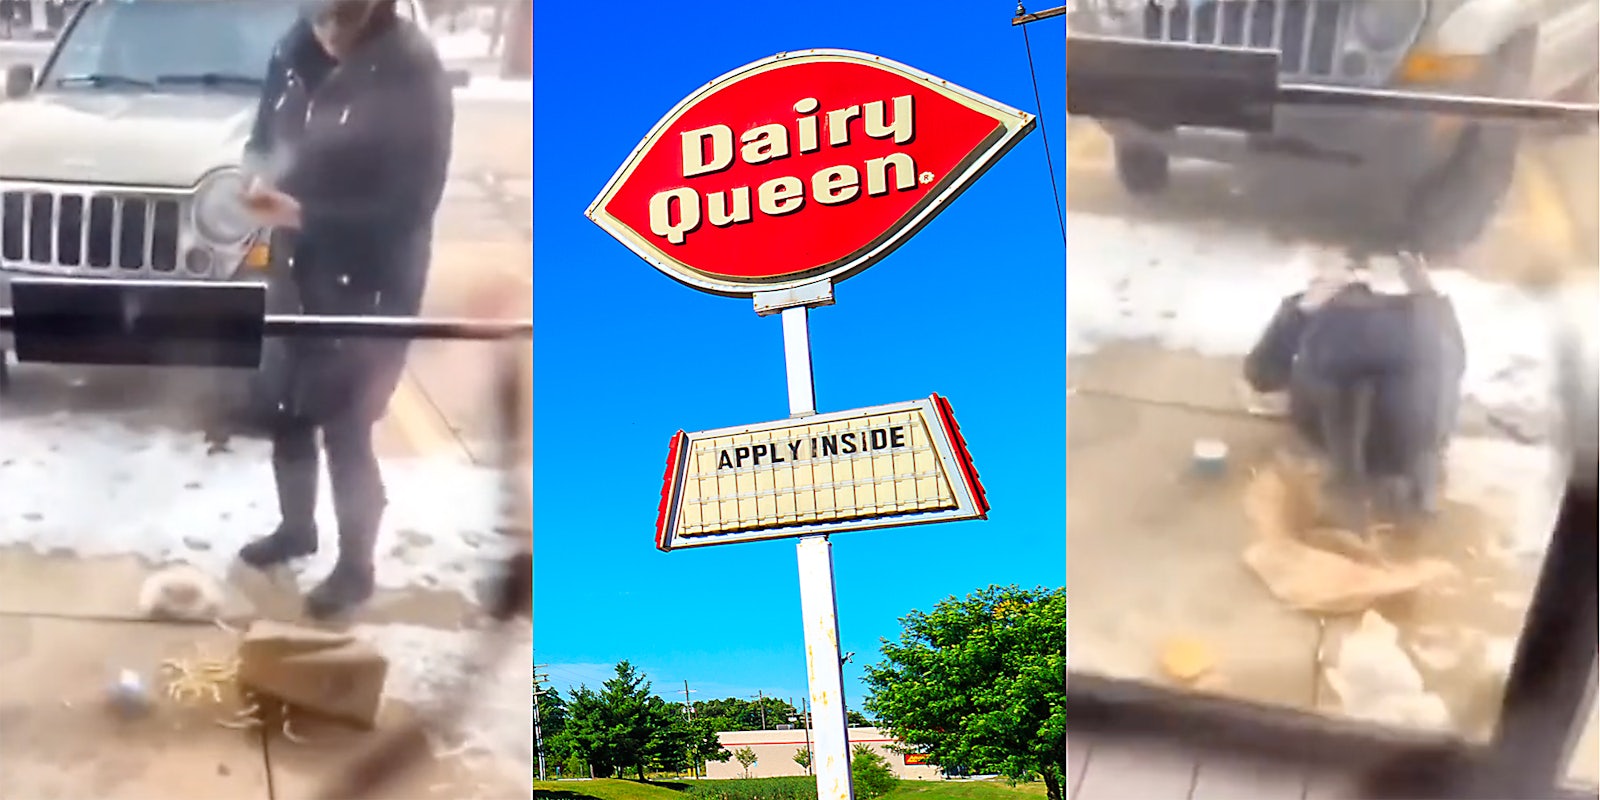 A woman slipping on fast food.